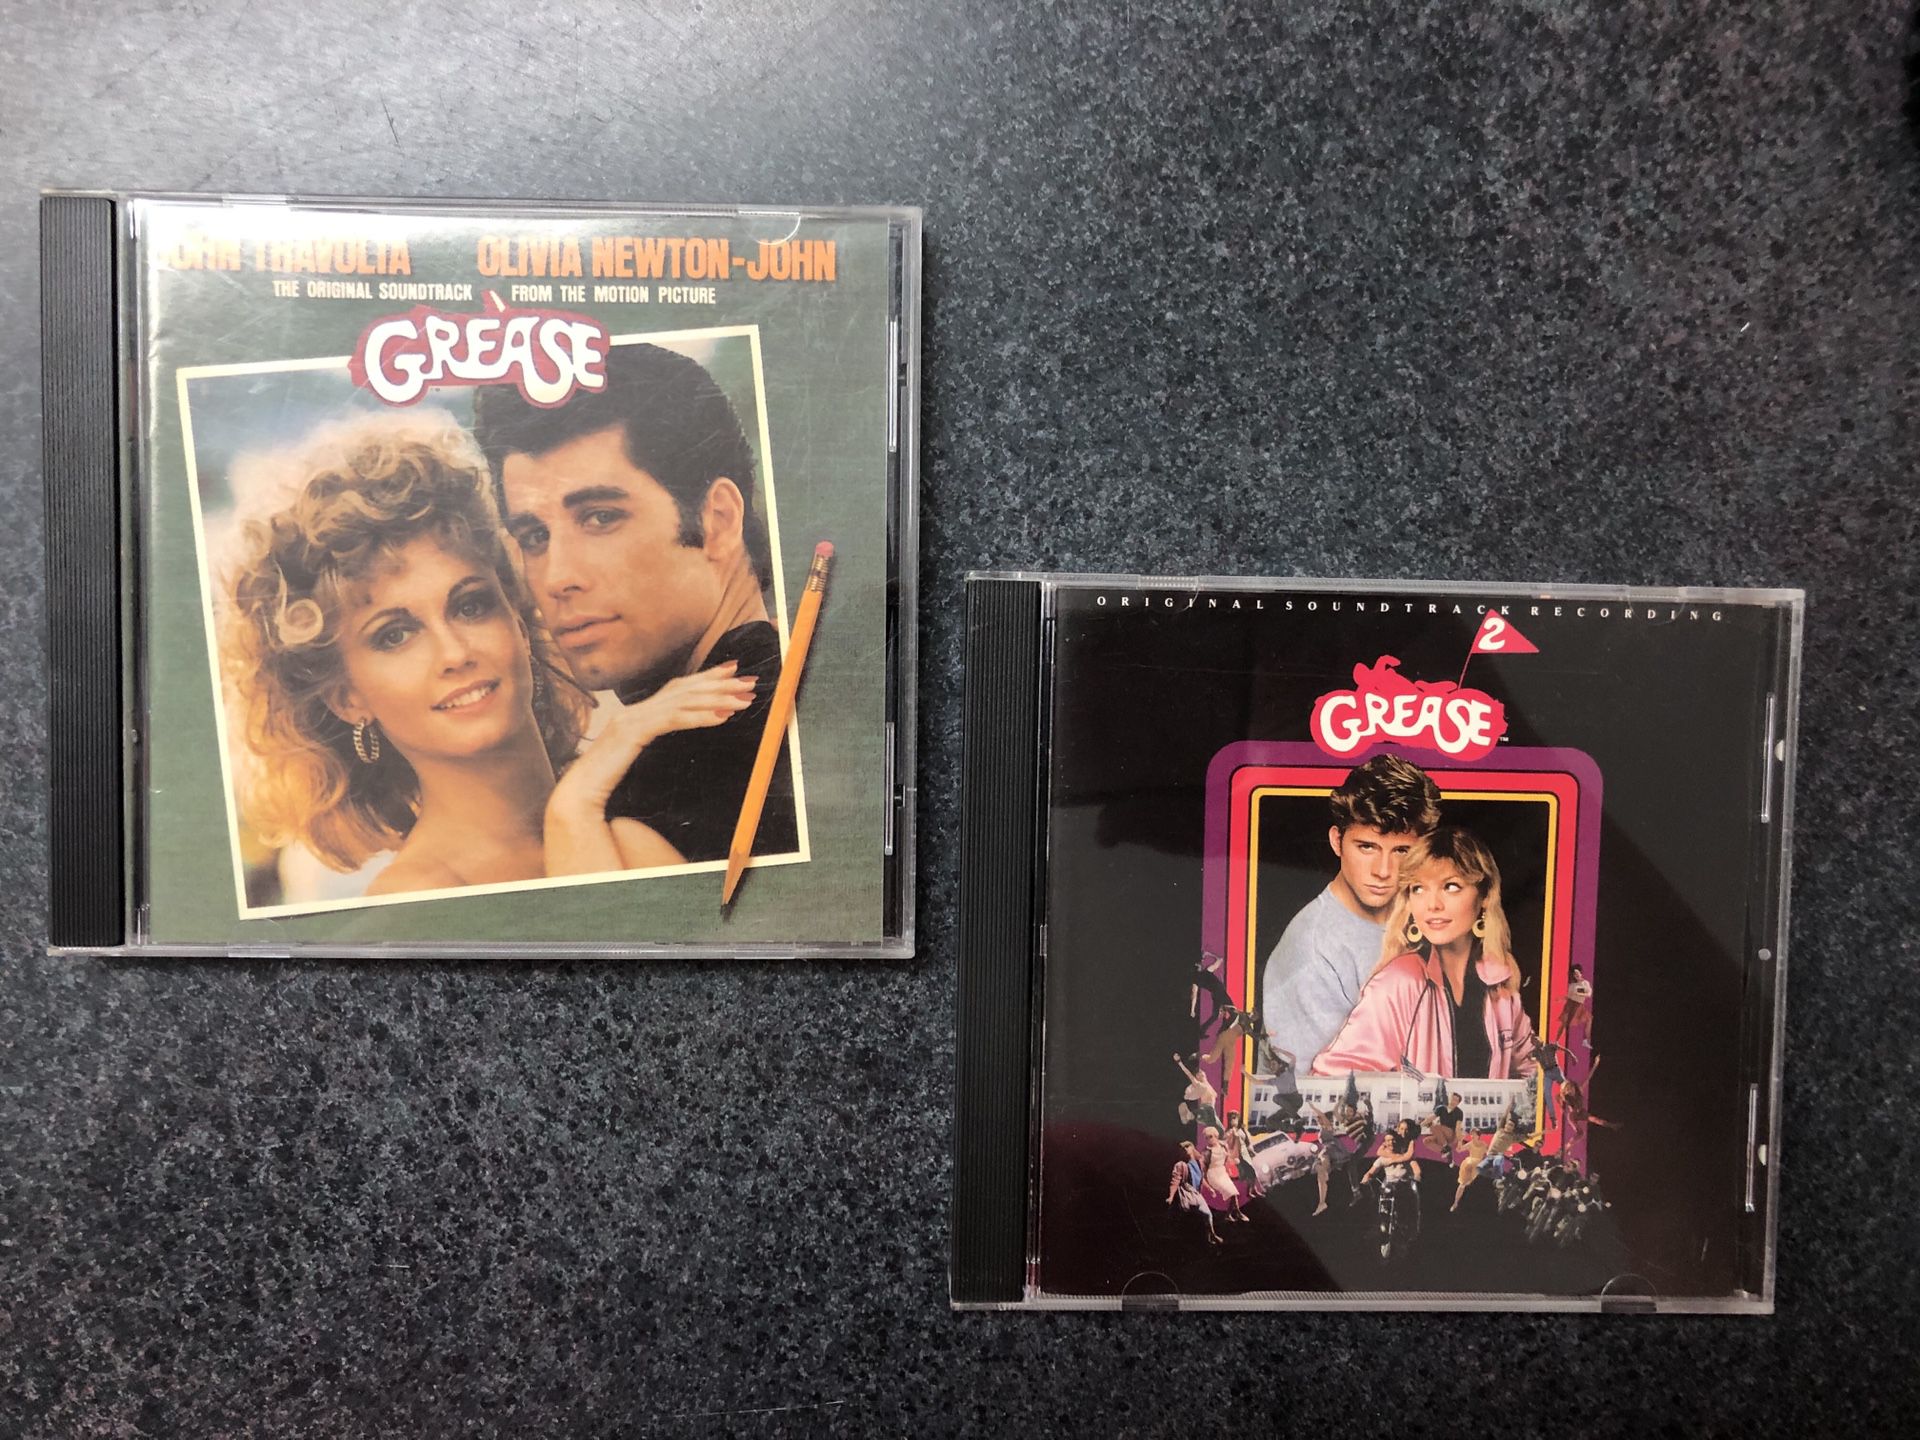 Grease and Grease 2 Soundtracks